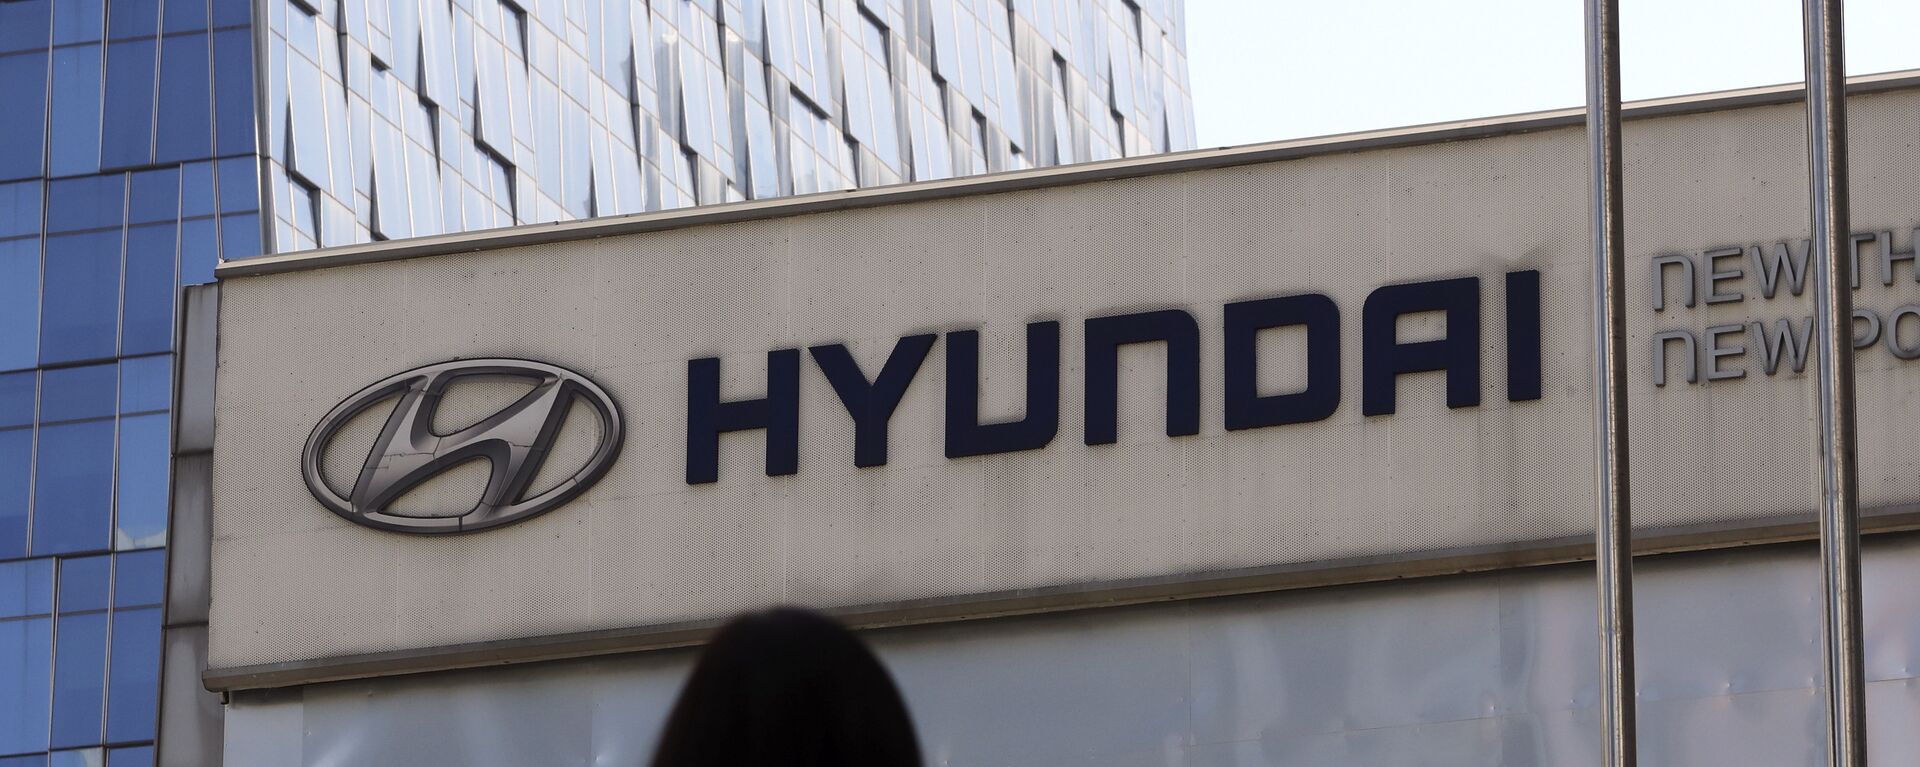 The logo of Hyundai Motor Co. is displayed at the automaker's showroom in Seoul, South Korea, Wednesday, April 26, 2017 - Sputnik International, 1920, 12.04.2021